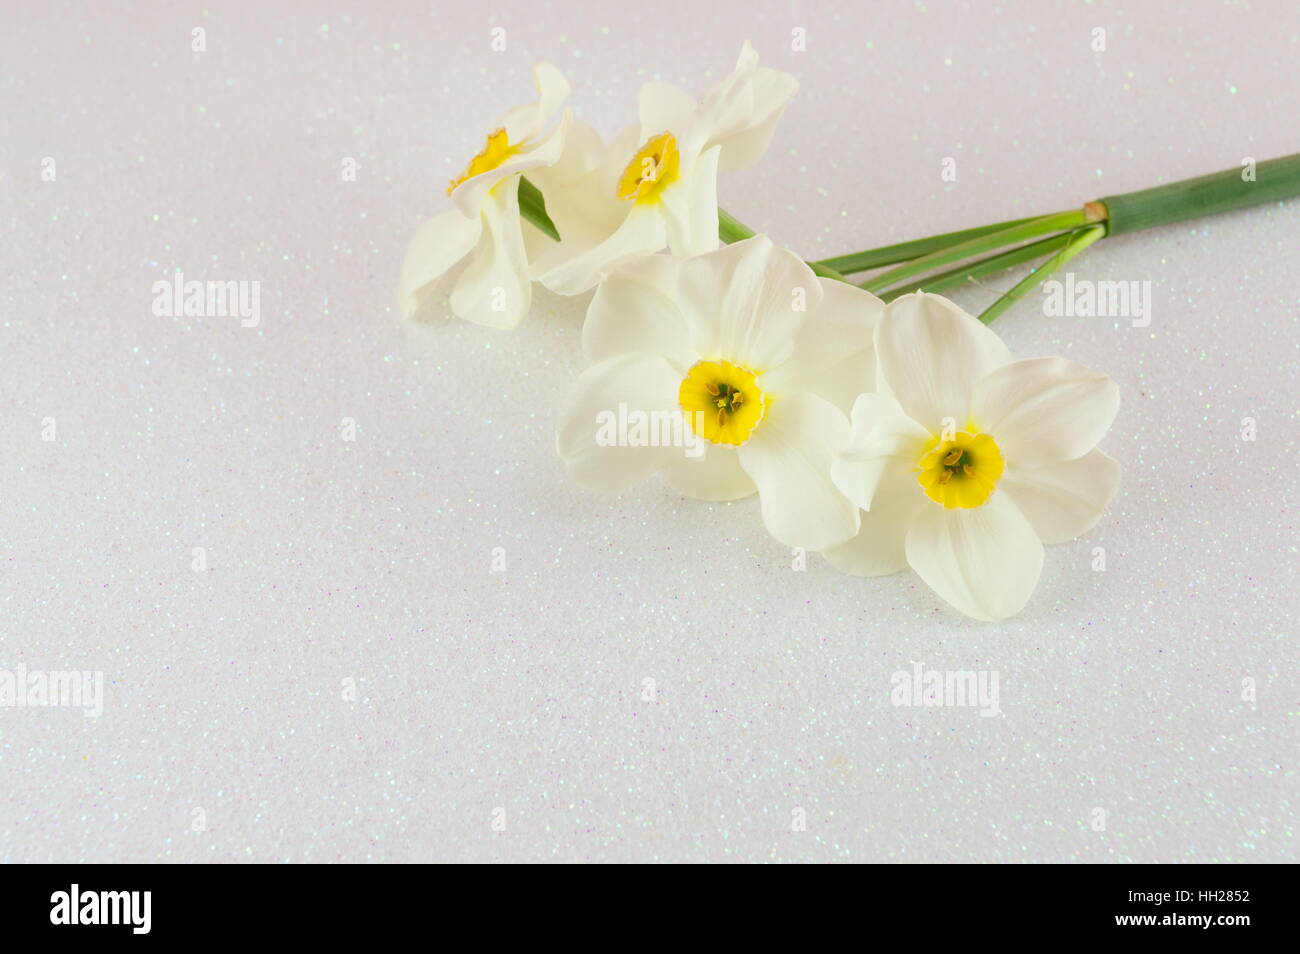 Narcissus flowers bouquet on white silk background Stock Photo